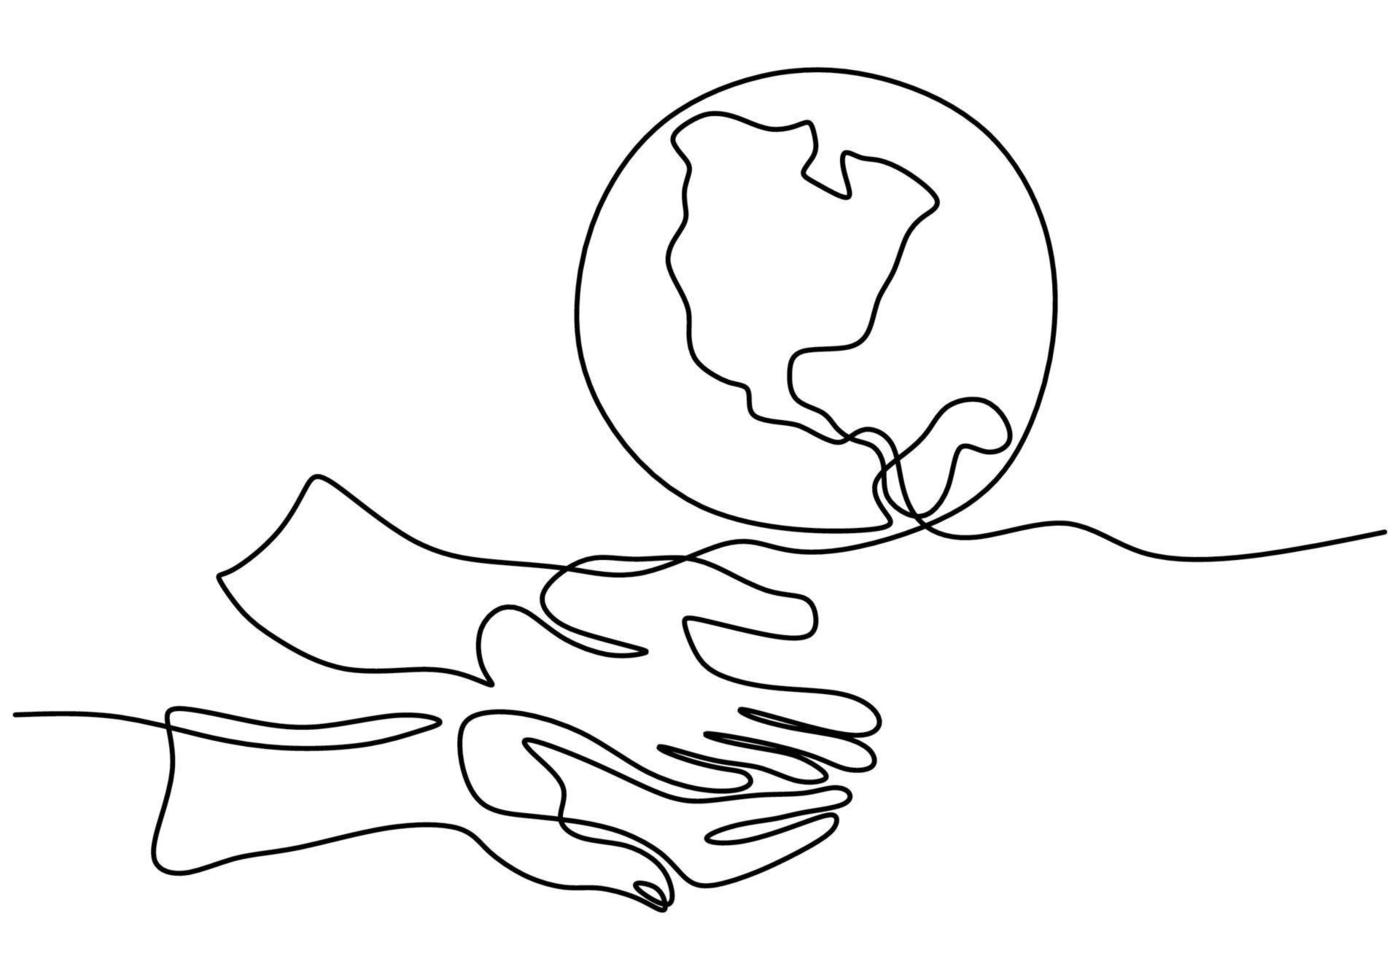 Continuous one line drawing of hands holding Earth globe isolated on white background. Earth Day theme. A human hand holding world planet earth contour hand drawn sketch design. Vector illustration